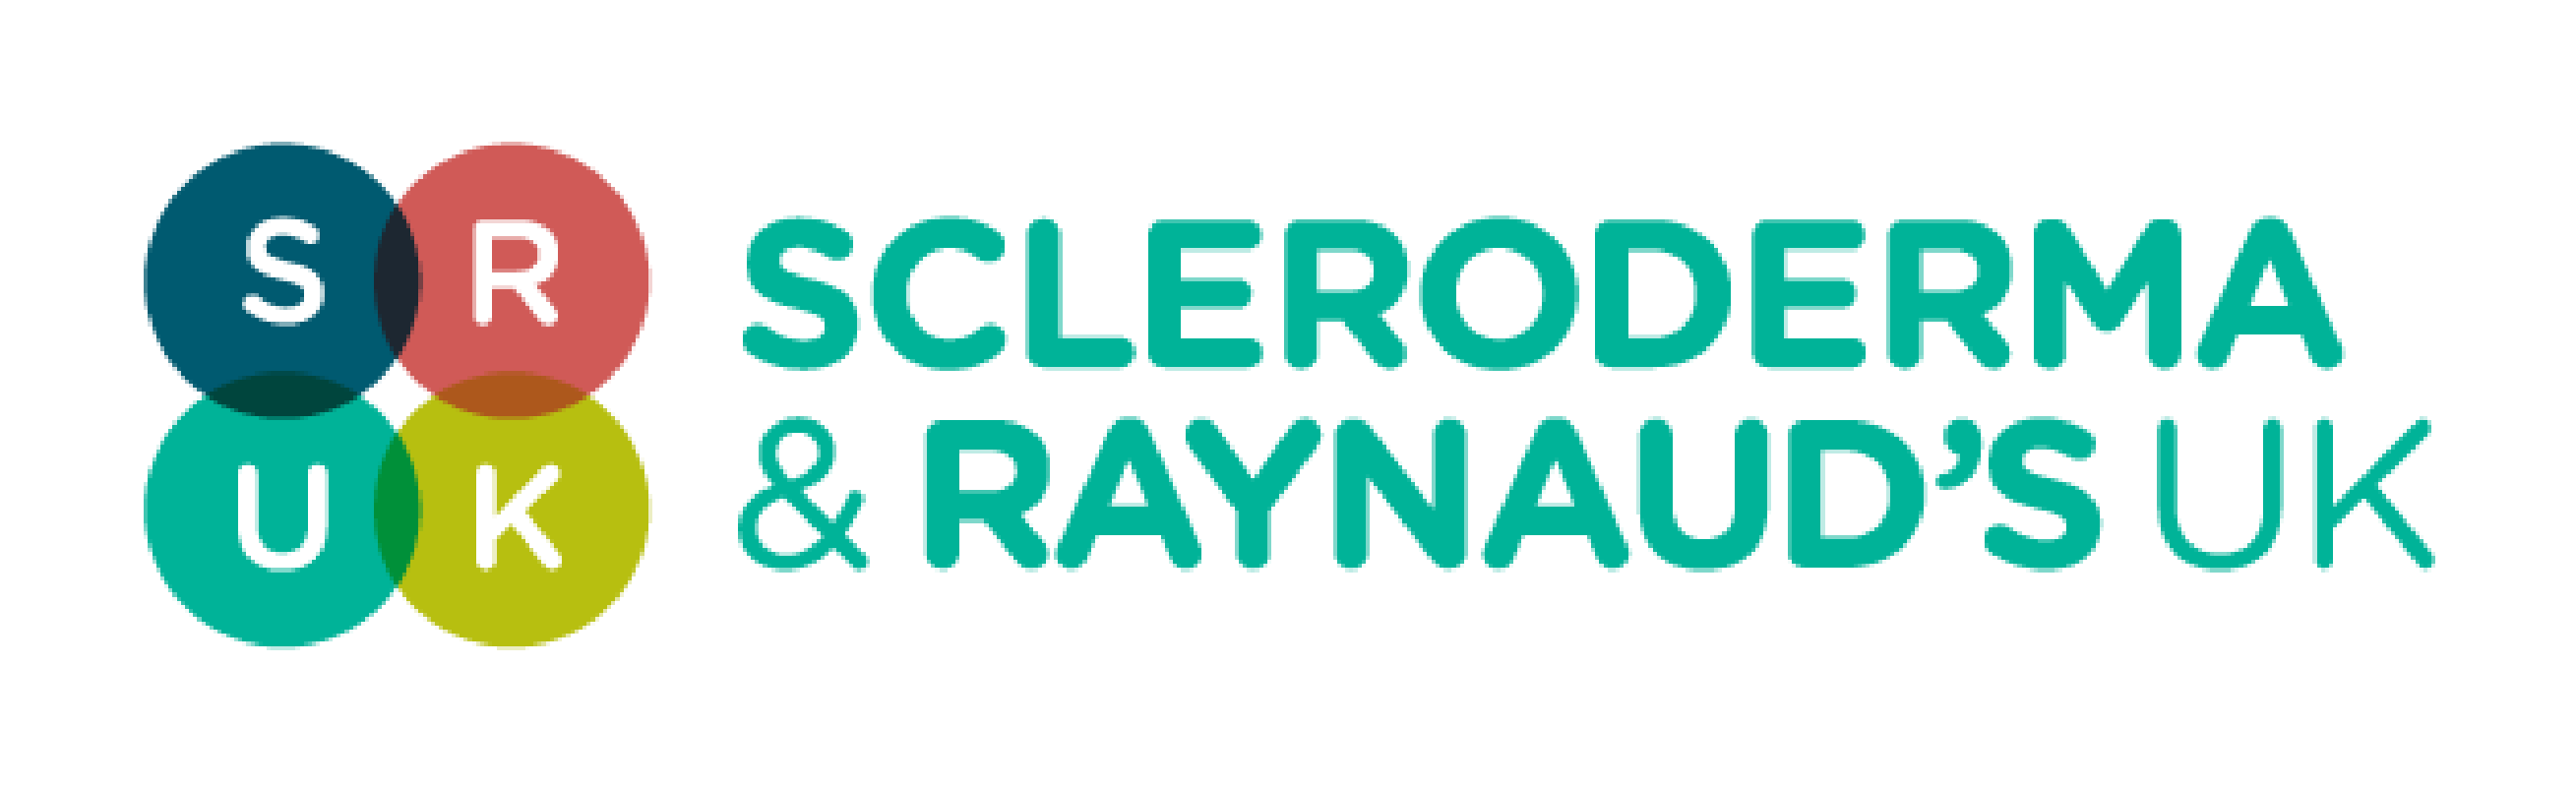 Scleroderma and Raynaud's UK